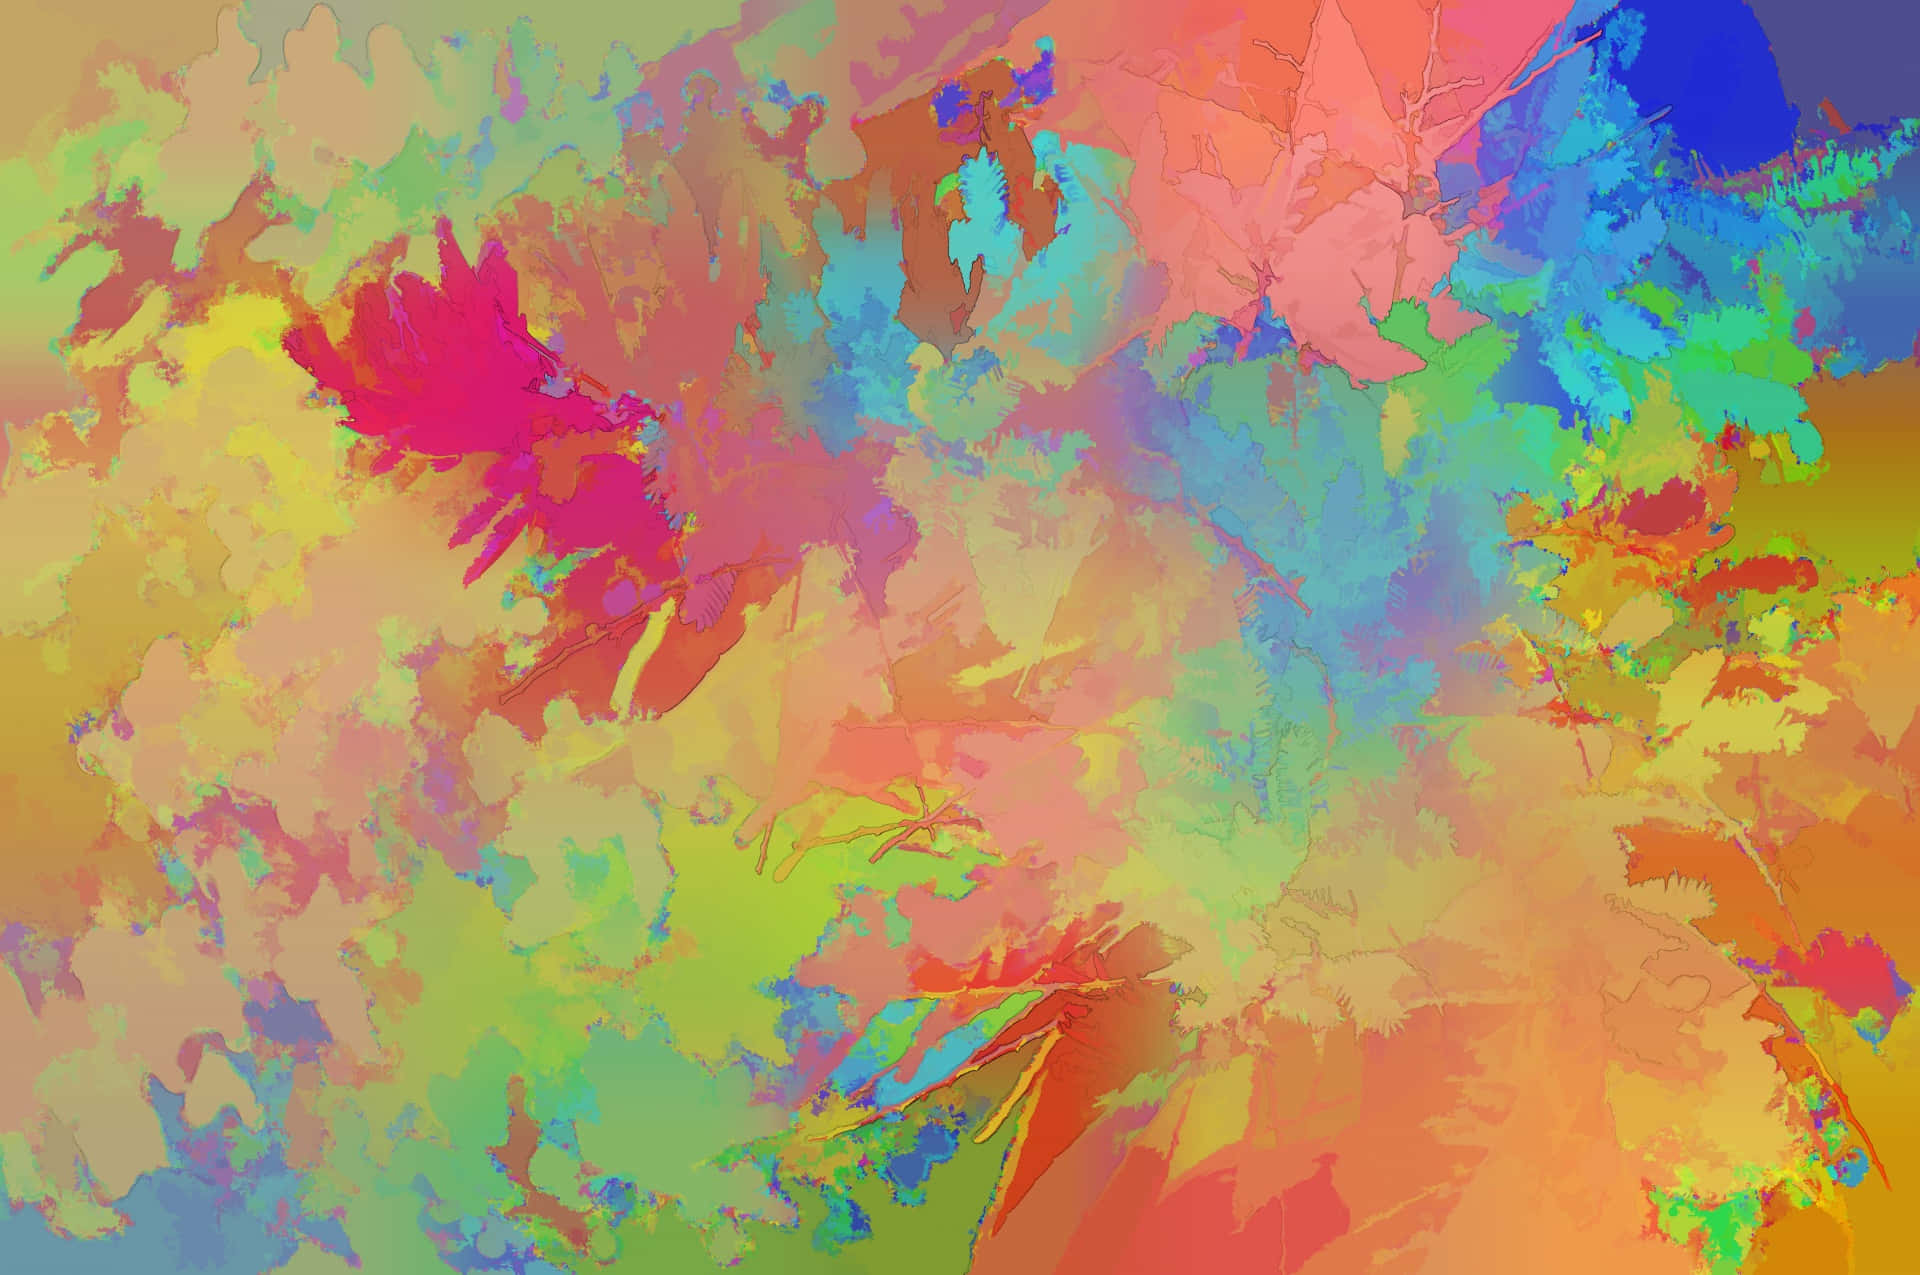 A vibrant abstract colorful background